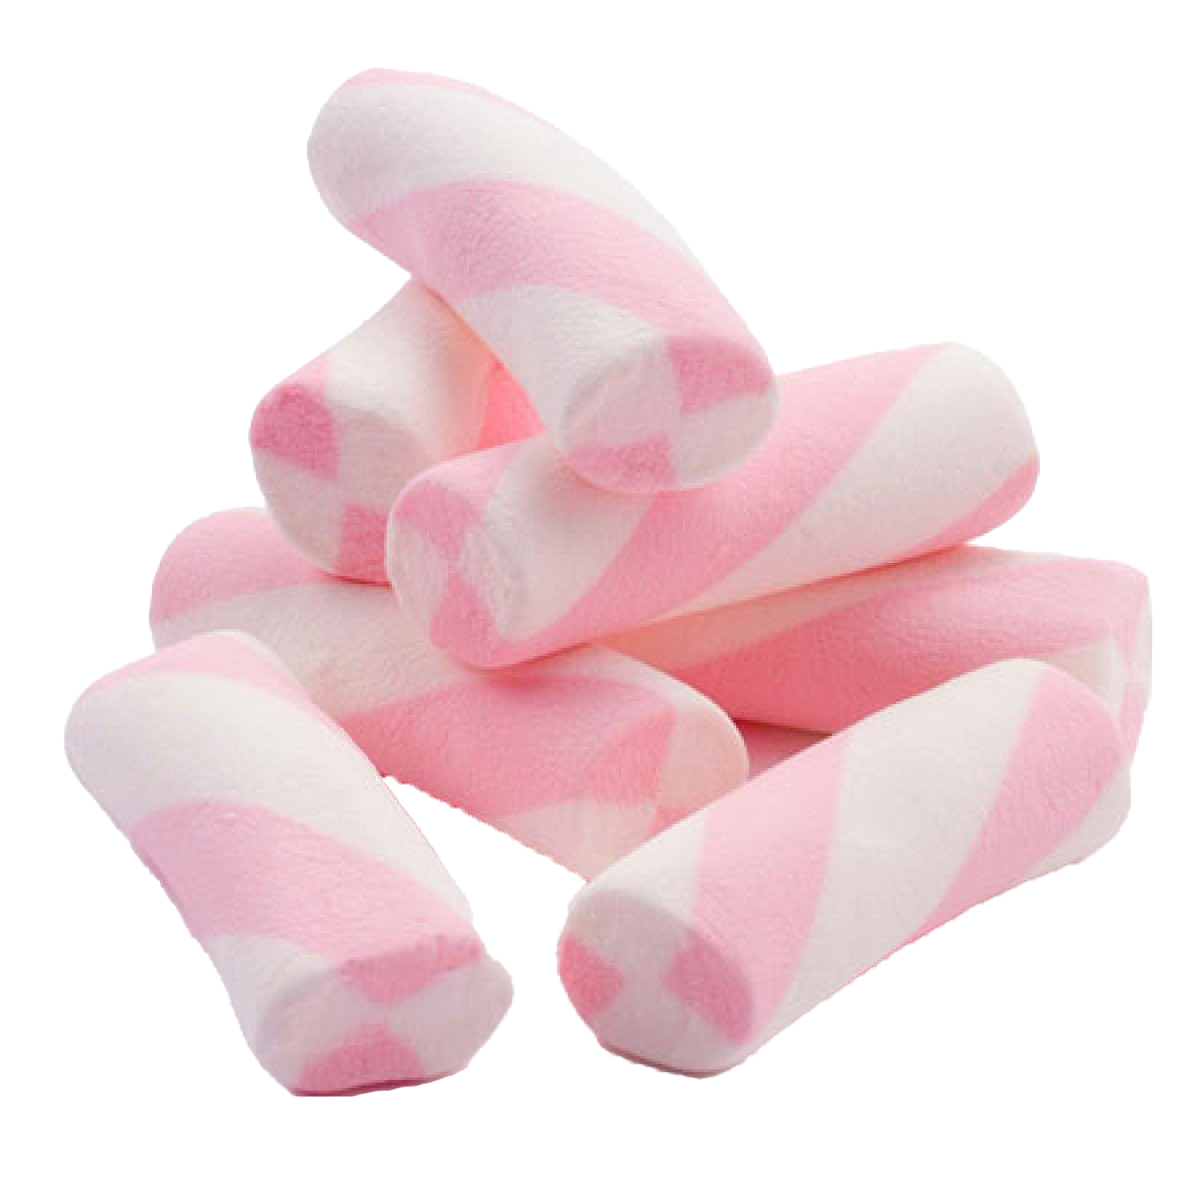 Luscious Toothsome Marshmallow Tasteful Scrumptious PNG